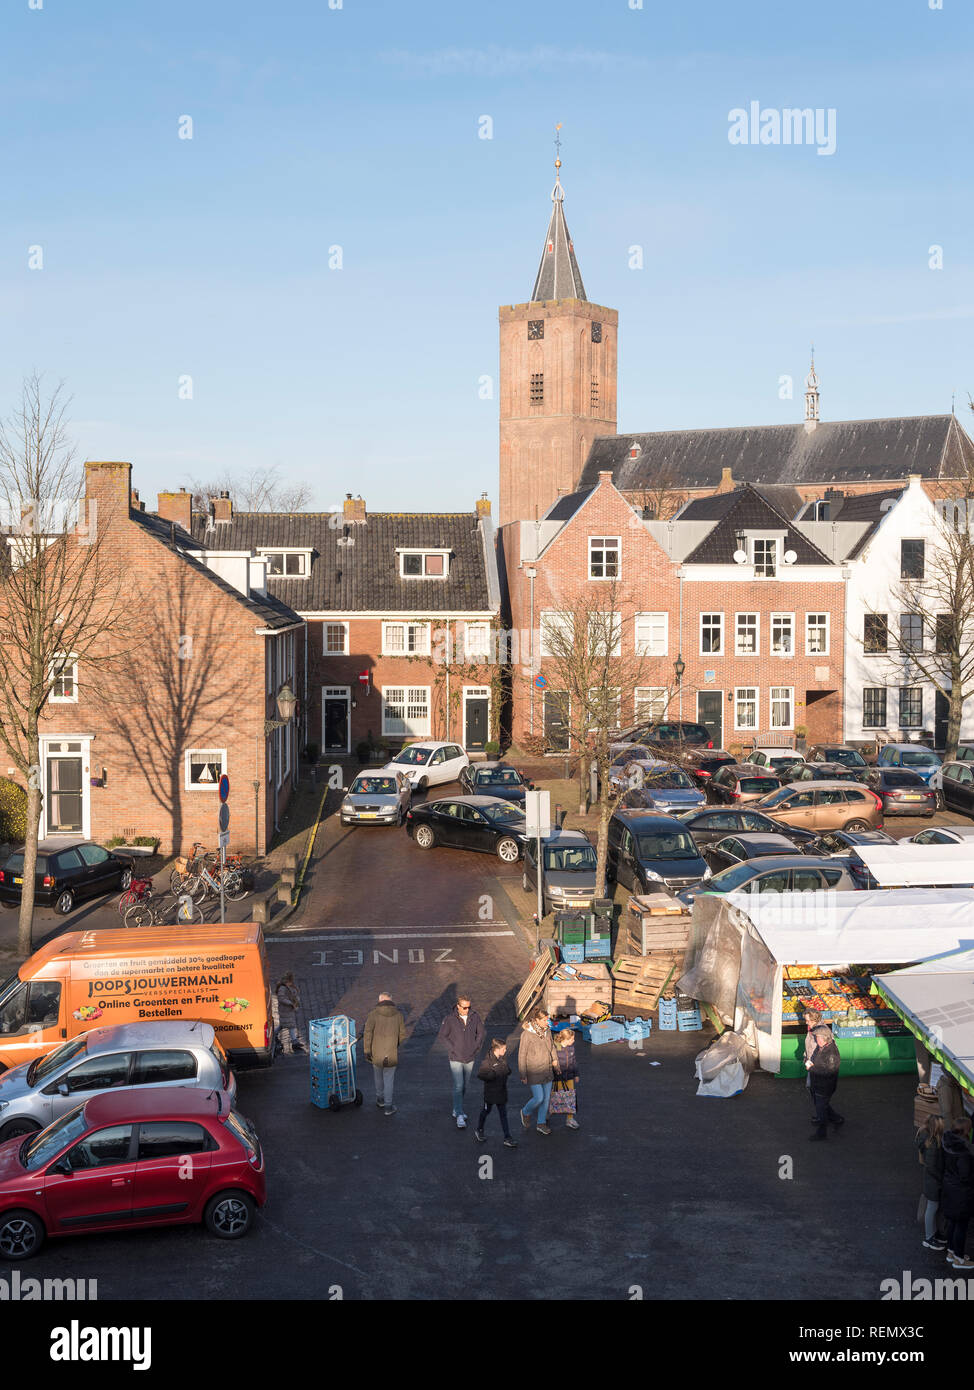 naarden, netherlands, 19 january 2019: people on open air market in the foreground of large old curch in dutch town of naarden vesting Stock Photo